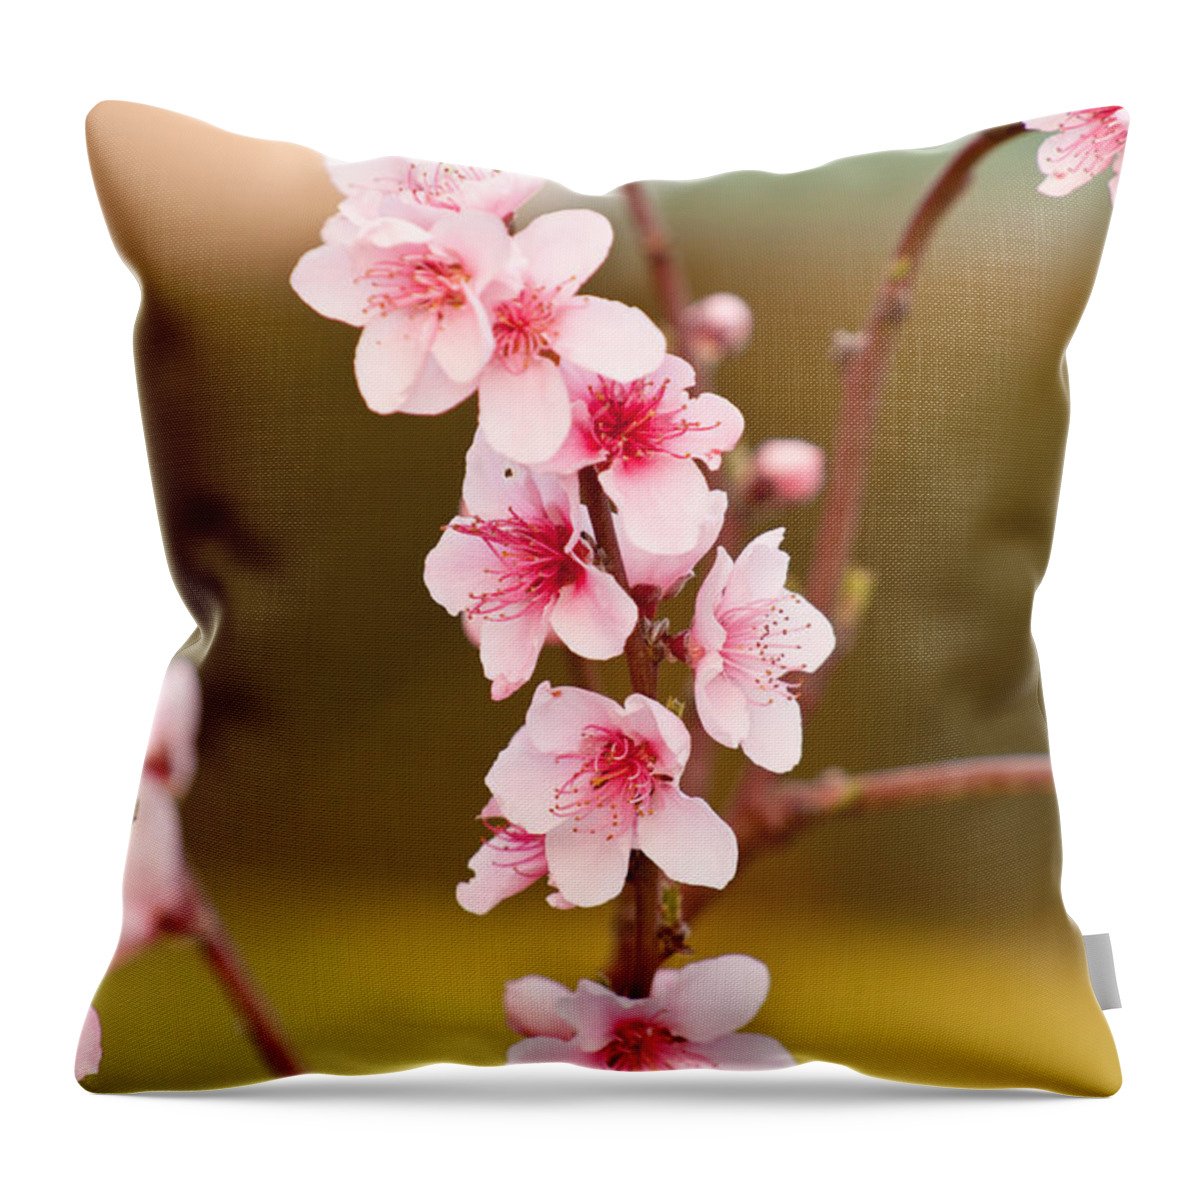 Peaches Throw Pillow featuring the photograph Peach Blossoms by Michelle Wrighton